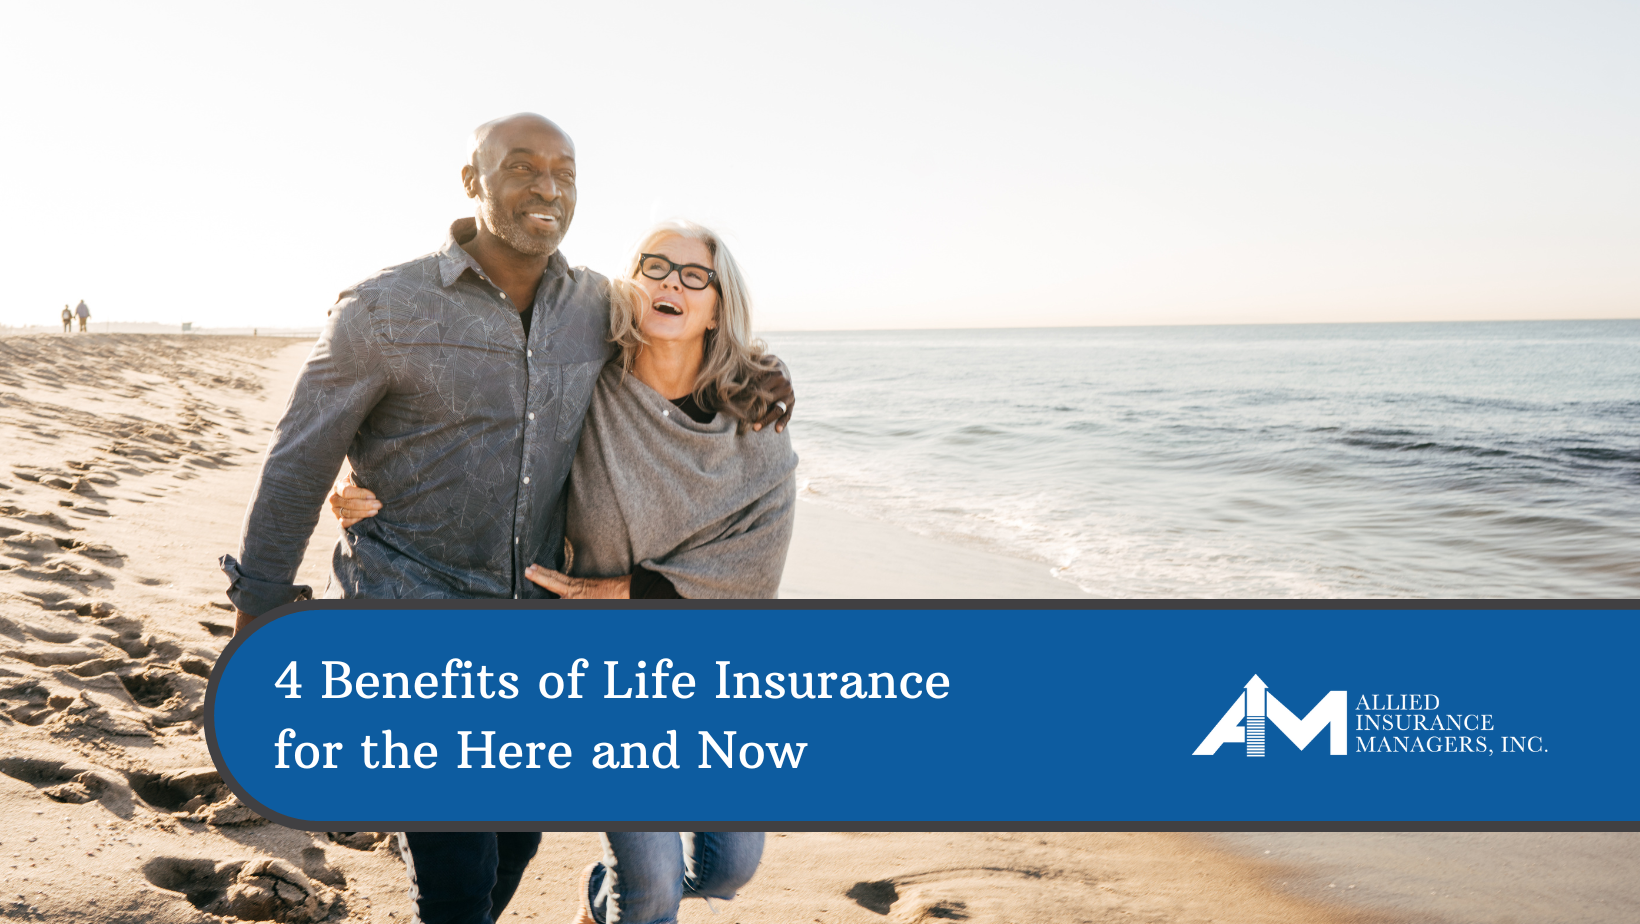 Did you know that there are some ways you can reap the benefits of your life insurance policy during your life? Learn more in this article!